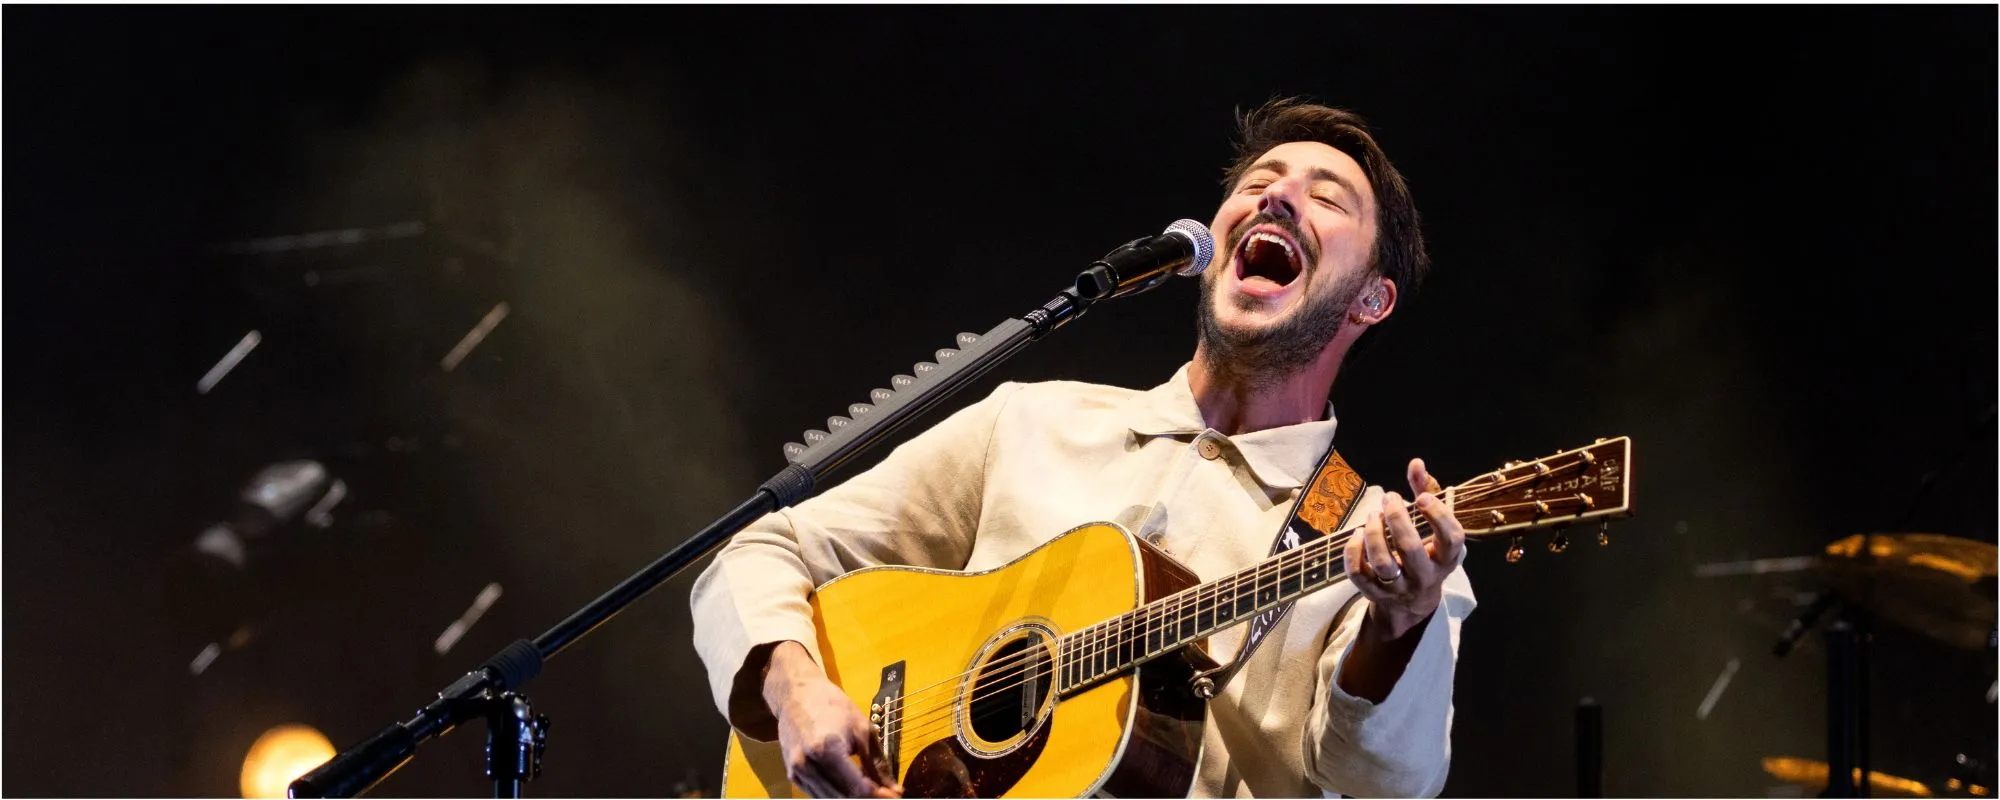 Mumford & Sons Debut New Song with Noah Kahan at ACL Festival